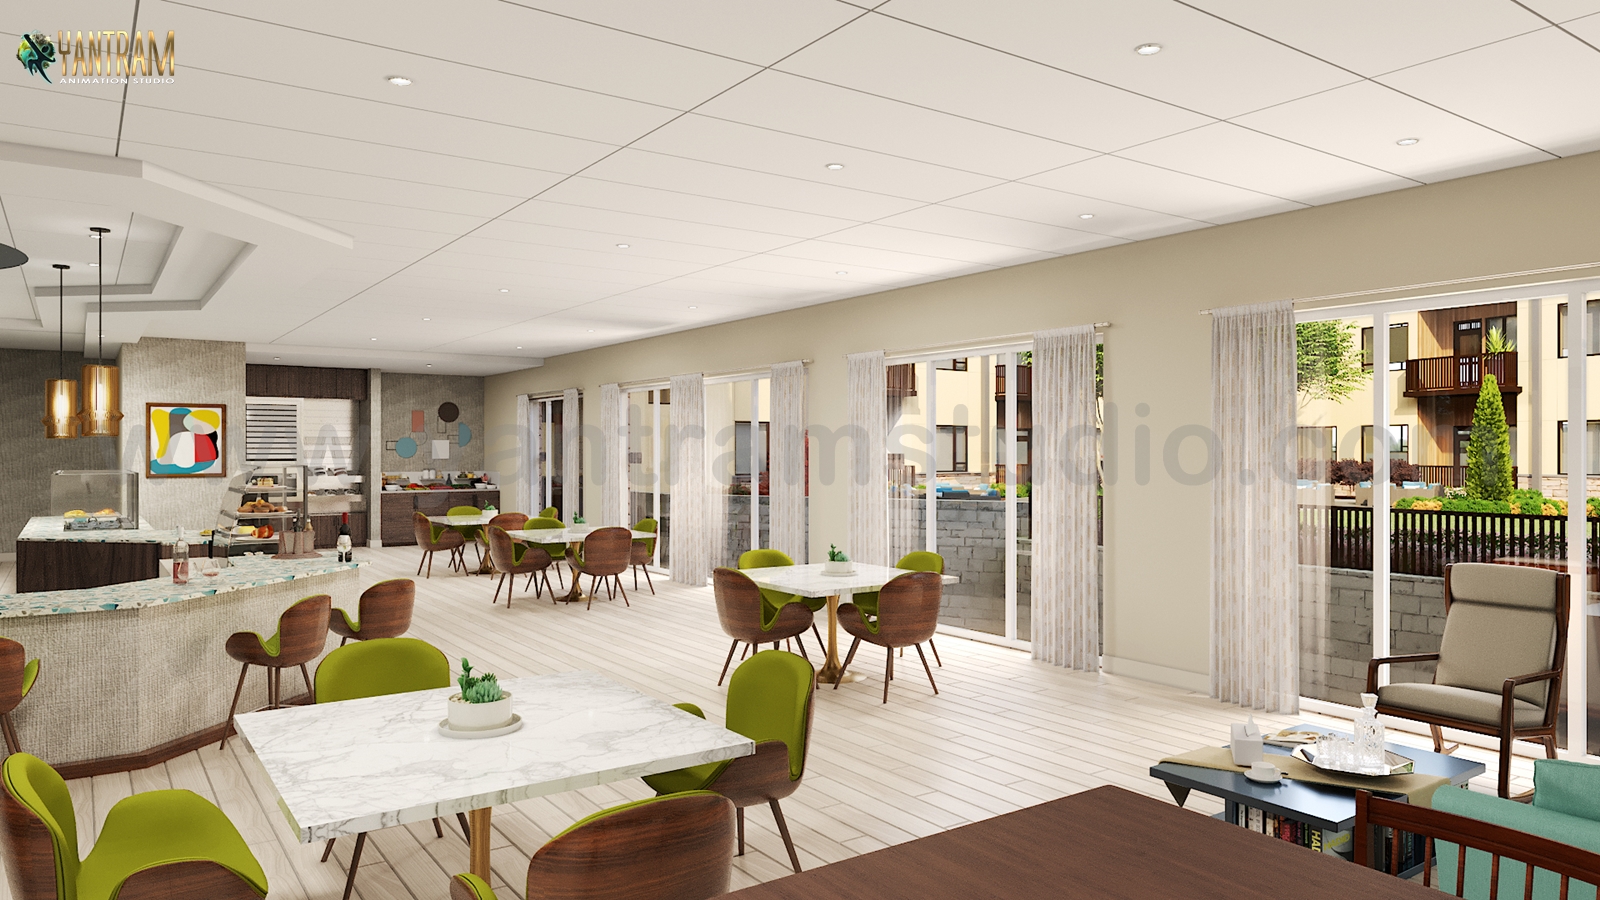 Residential Community Amenities area Designed by Yantram 3d Interior Design Firm, Rio Rancho – New Mexico